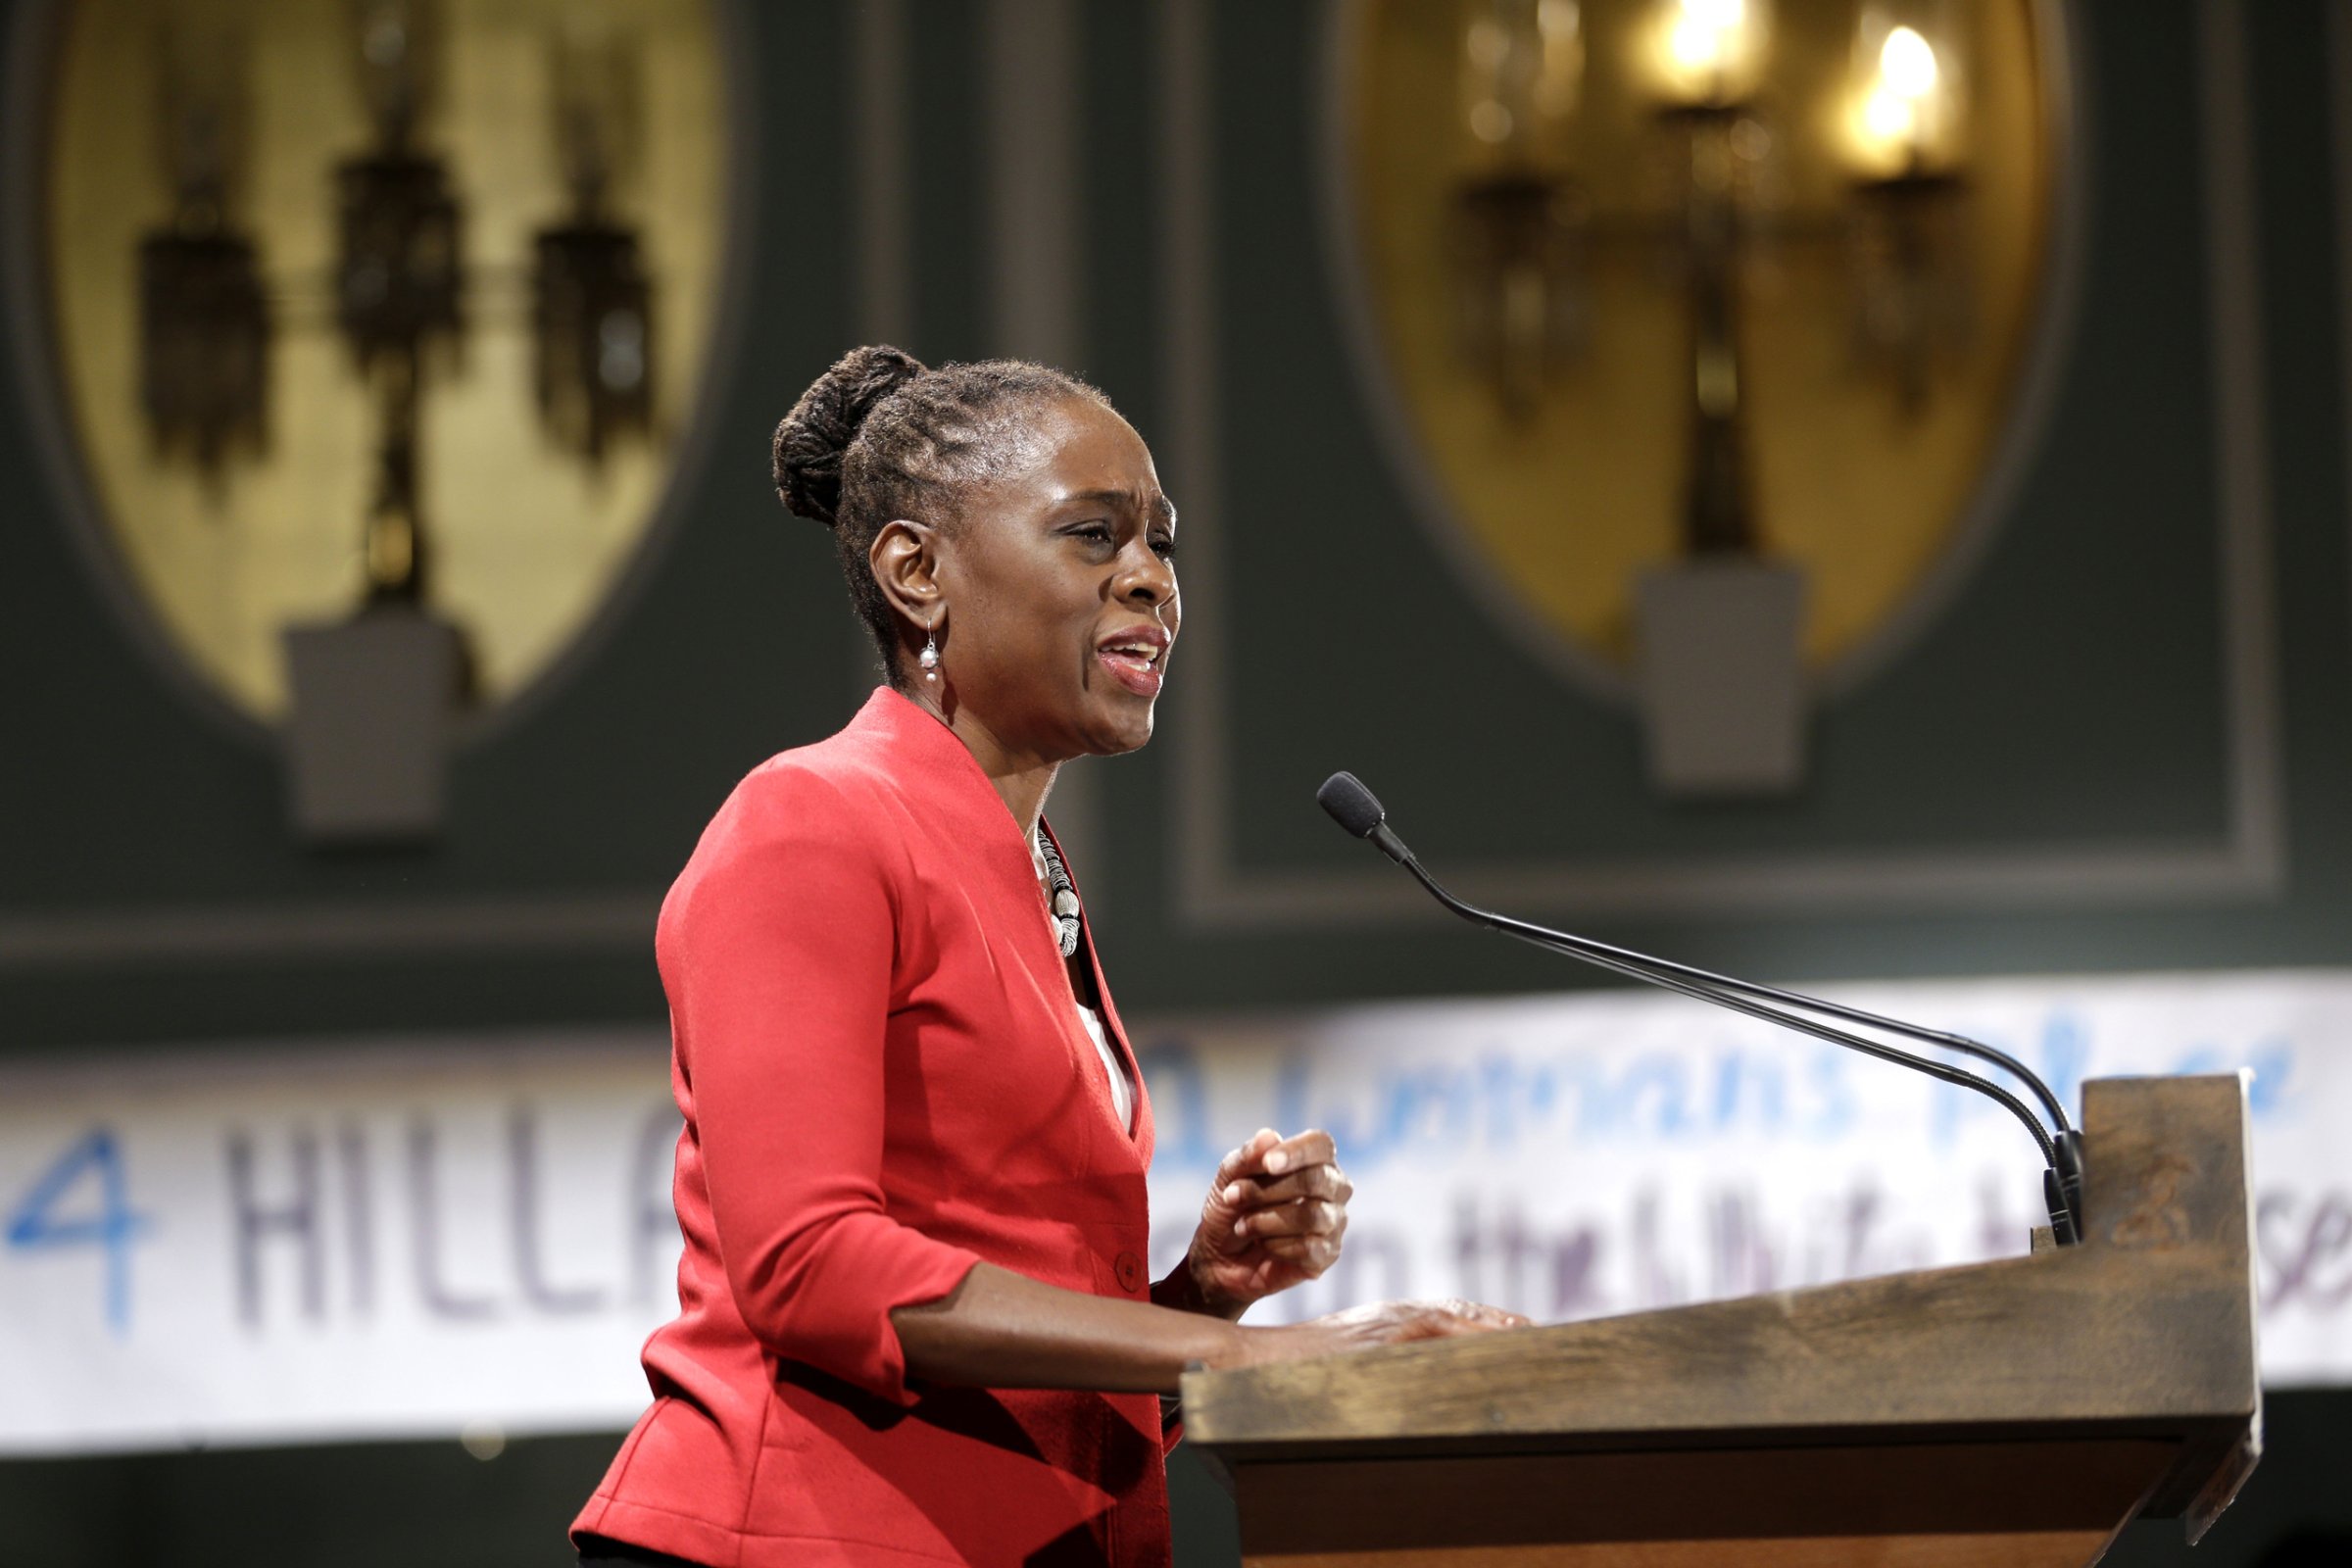 First lady of New York City Chirlane McCray speaks during a Women for Hillary event in New York, Monday, April 18, 2016. (AP Photo/Seth Wenig)